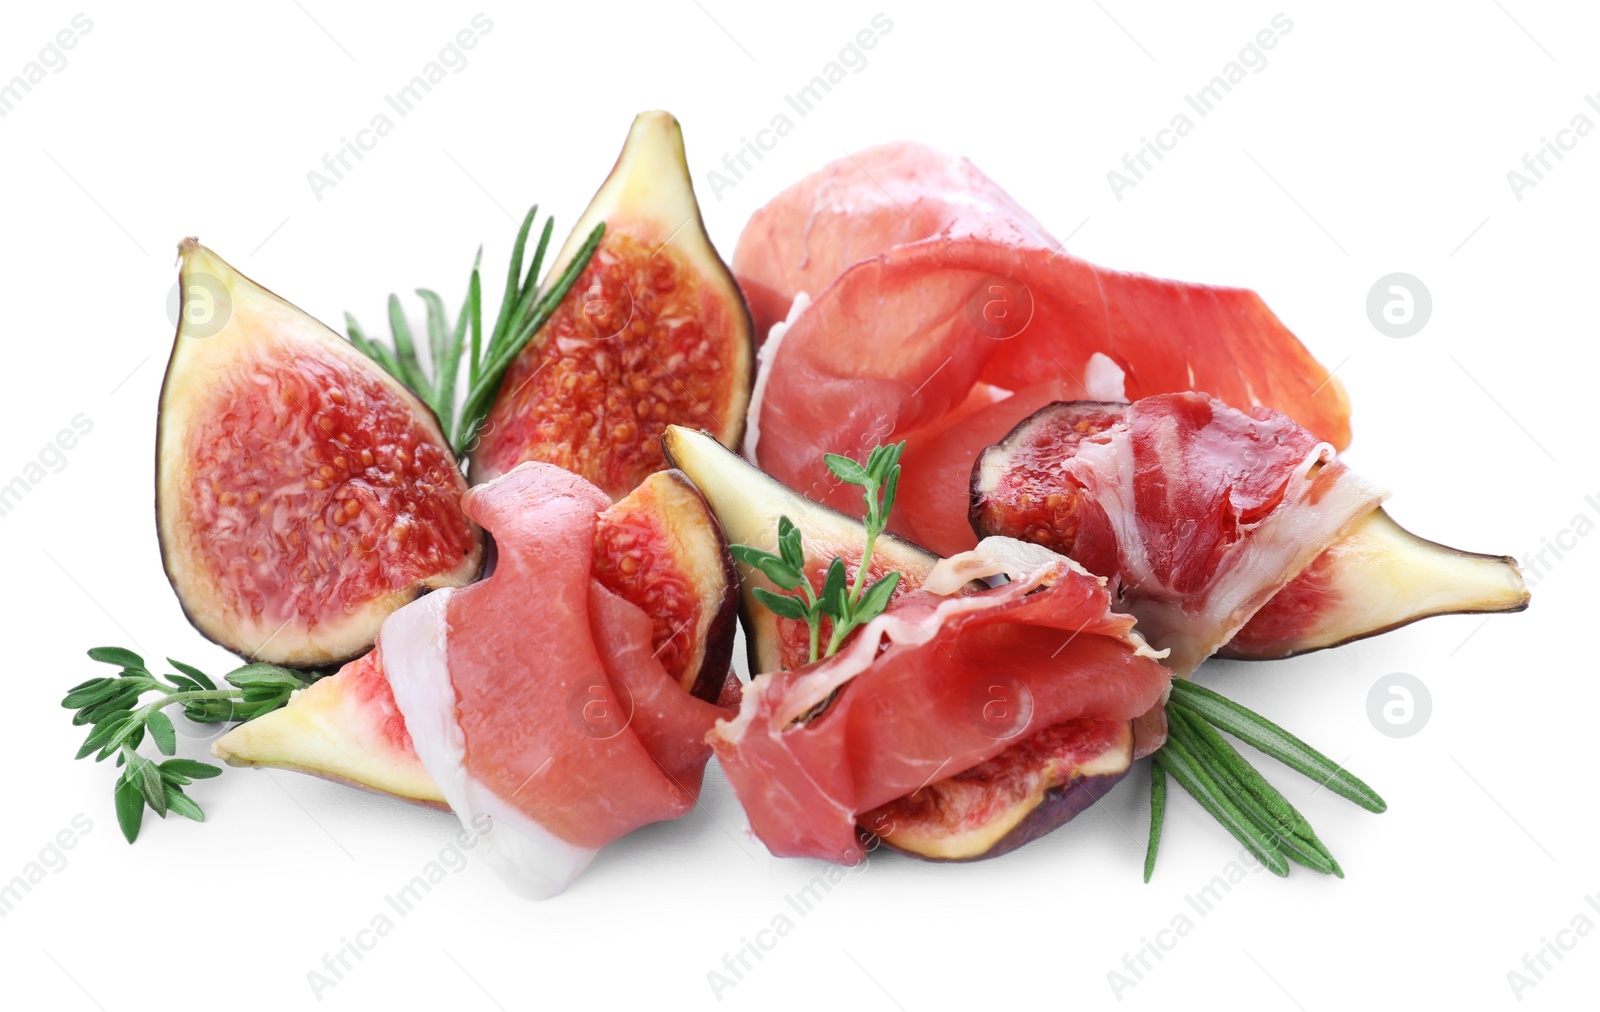 Photo of Delicious ripe figs, prosciutto and herbs on white background